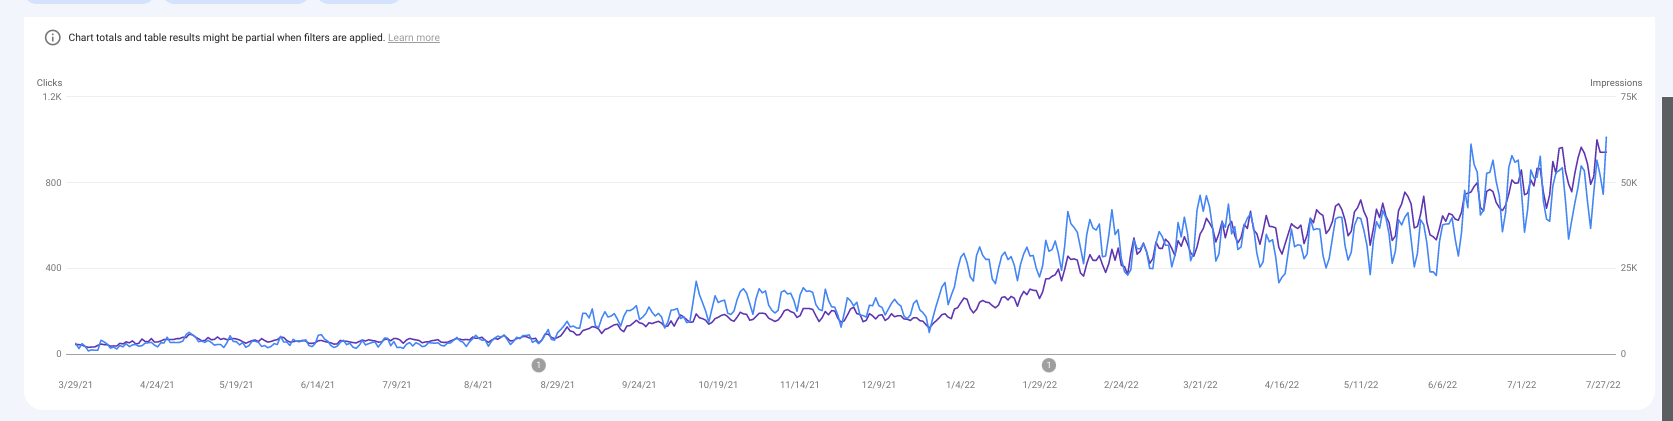 traffic graph from google search console